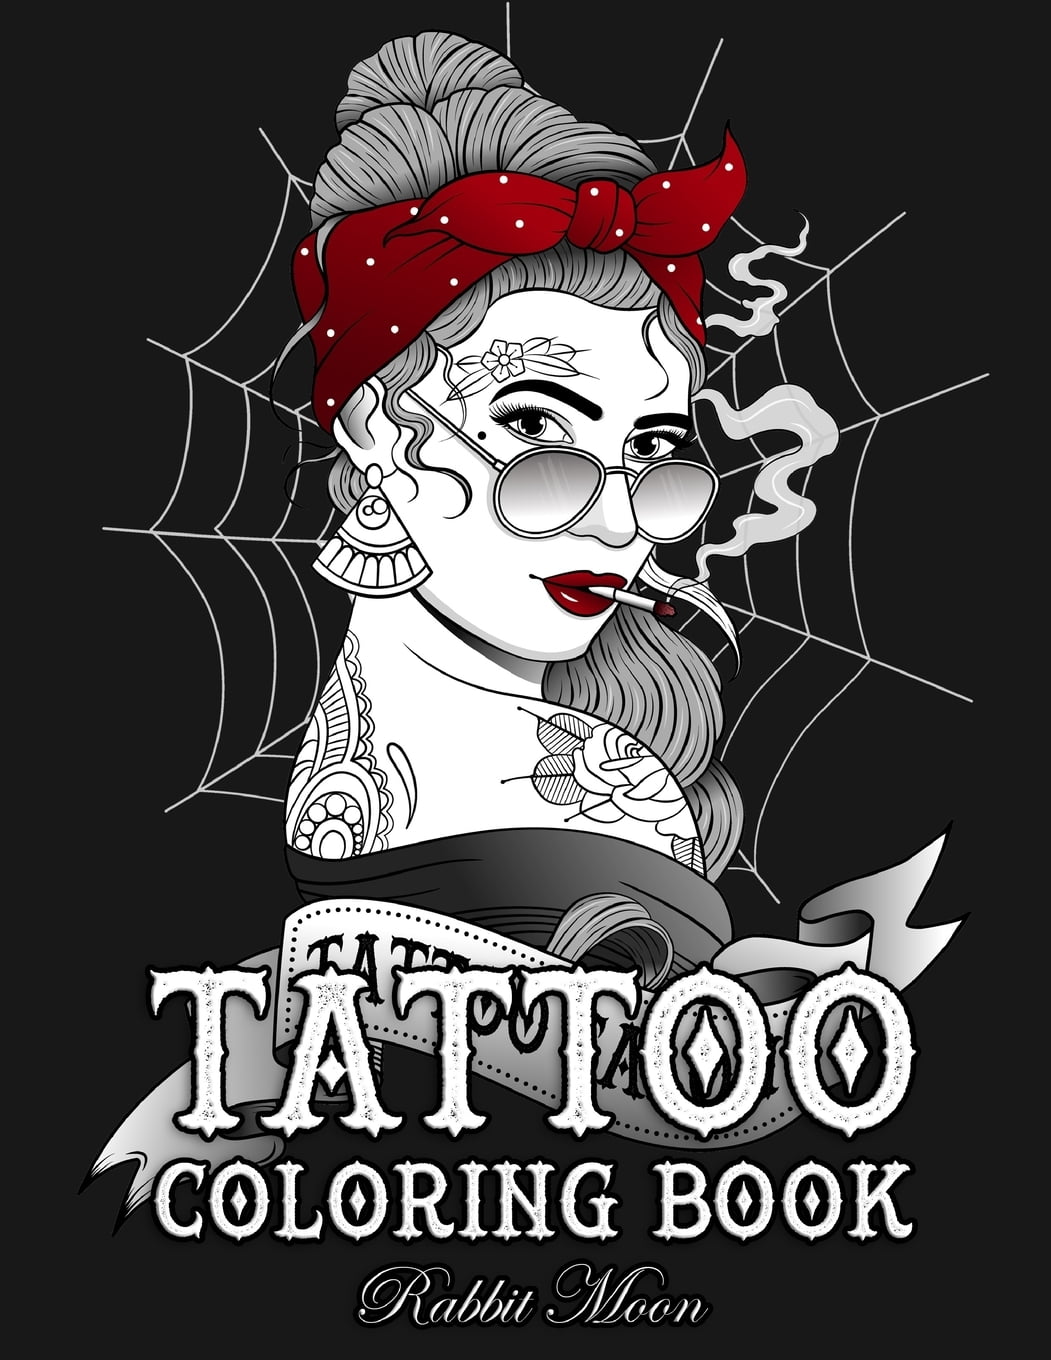 Tattoo Coloring Book: An Adult Coloring Book with Awesome and Relaxing  Beautiful Modern Tattoo Designs for Men and Women Coloring Pages Volu  (Paperback)